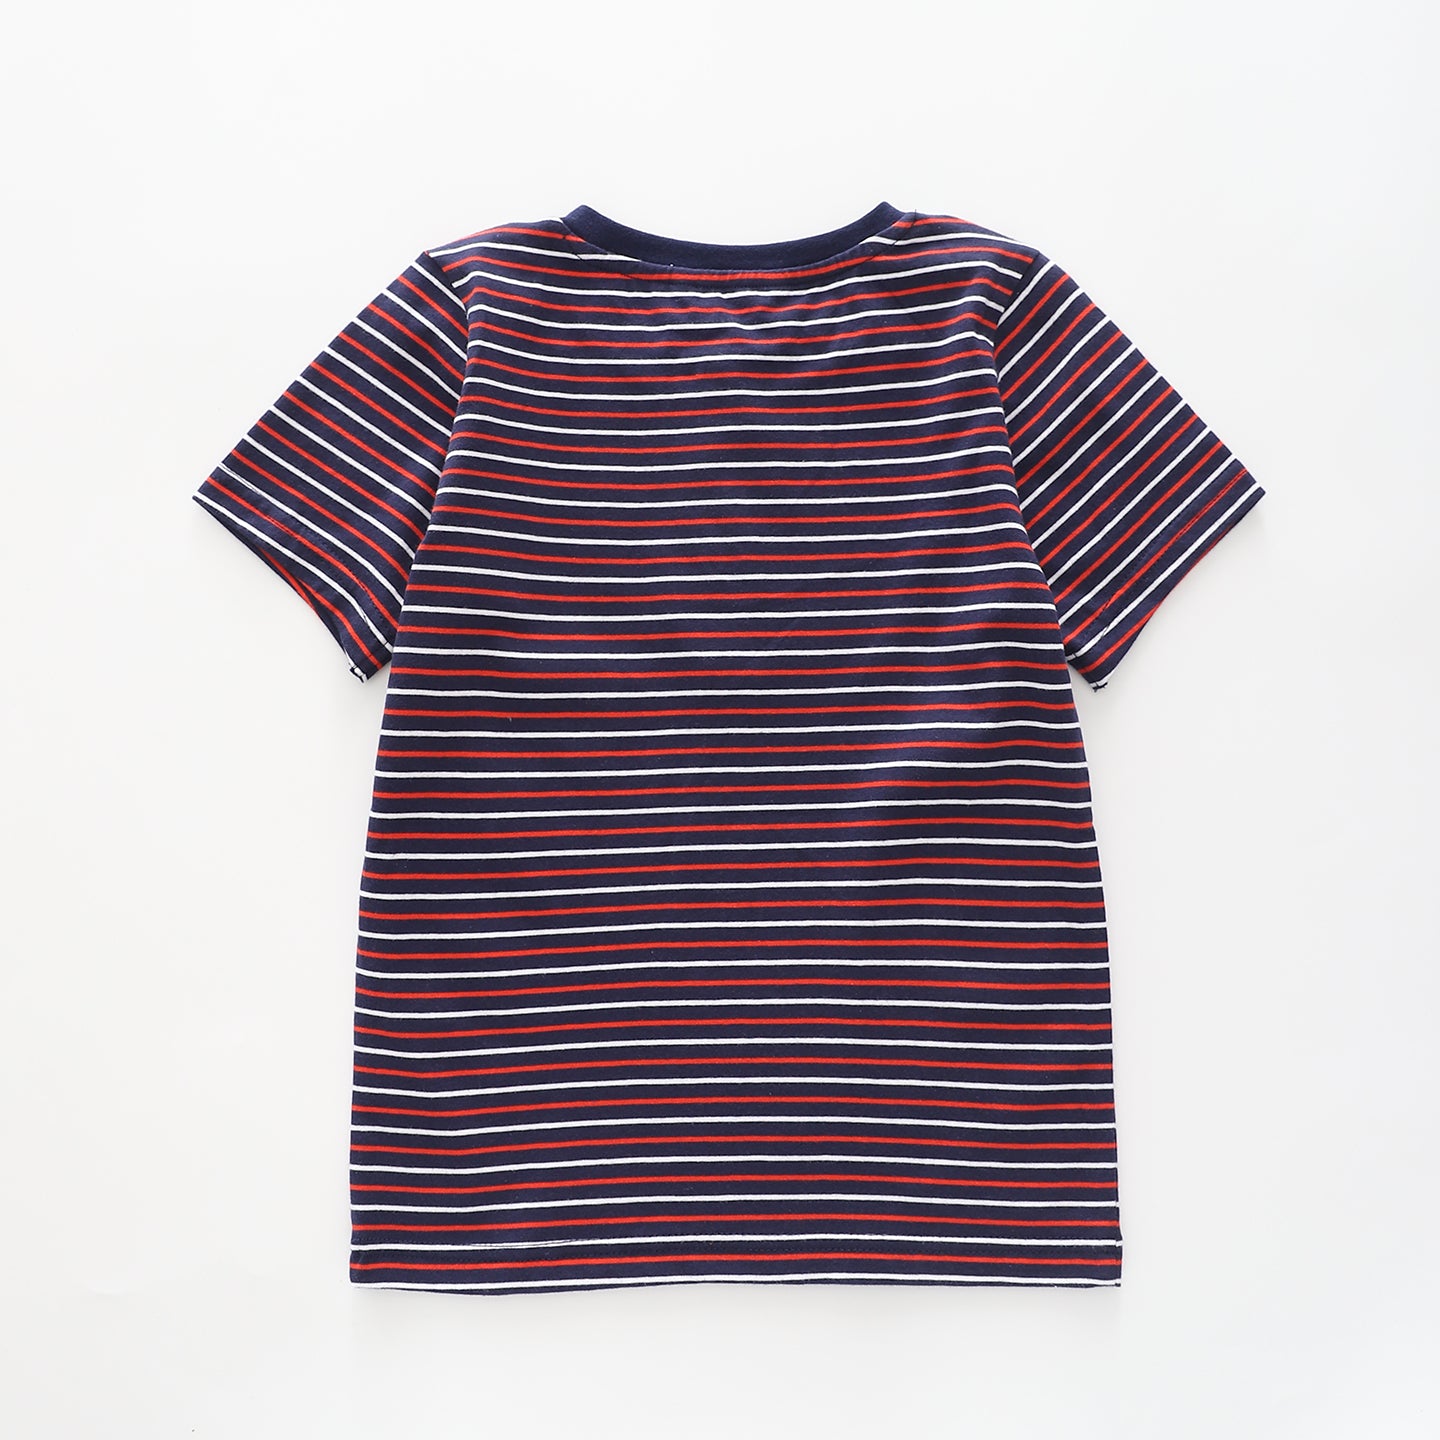 Boy's Navy, Red And White Striped Henley T-shirt